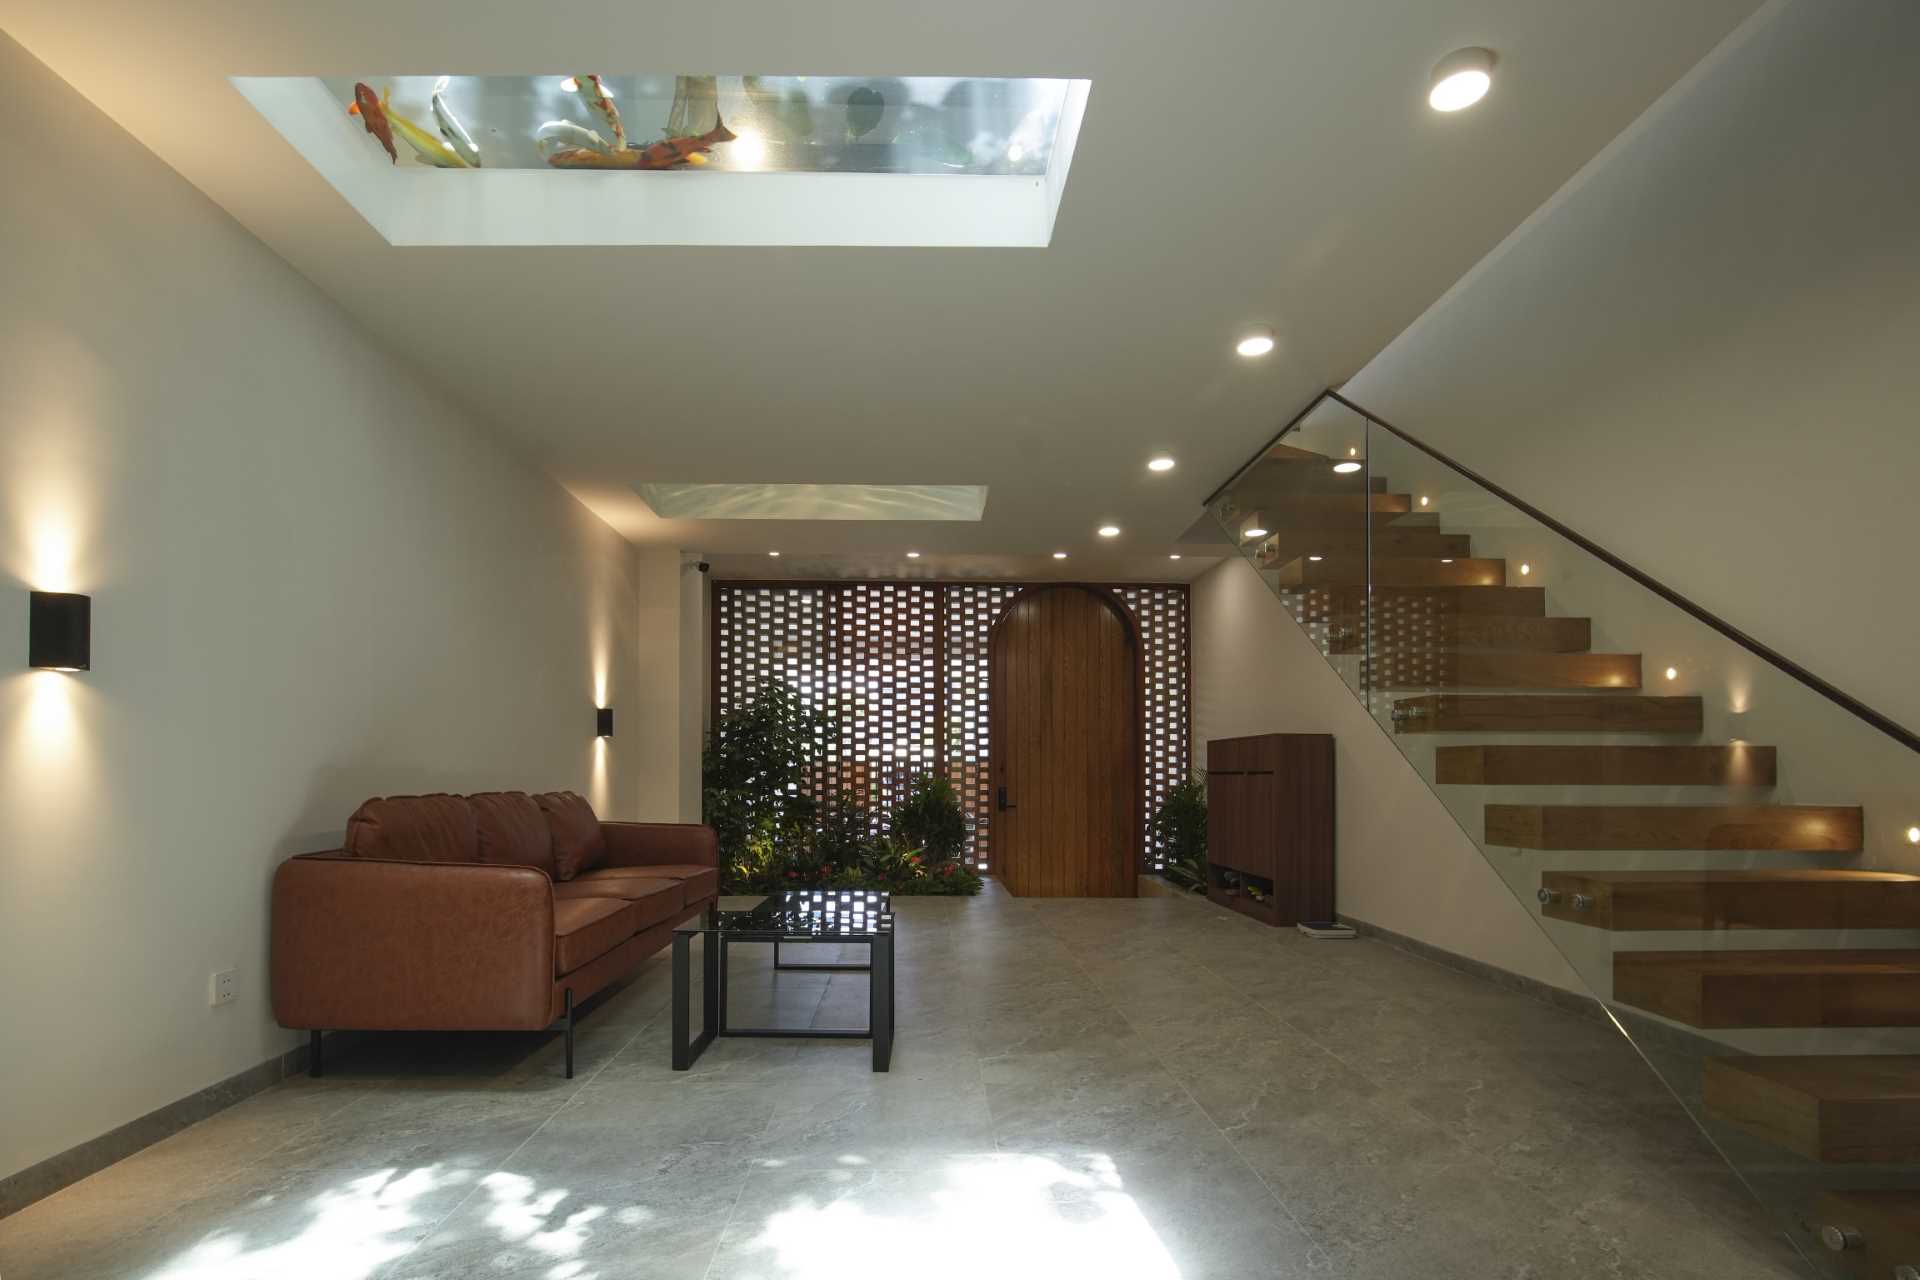 A modern entryway with a living room that has a view of the koi pond above.